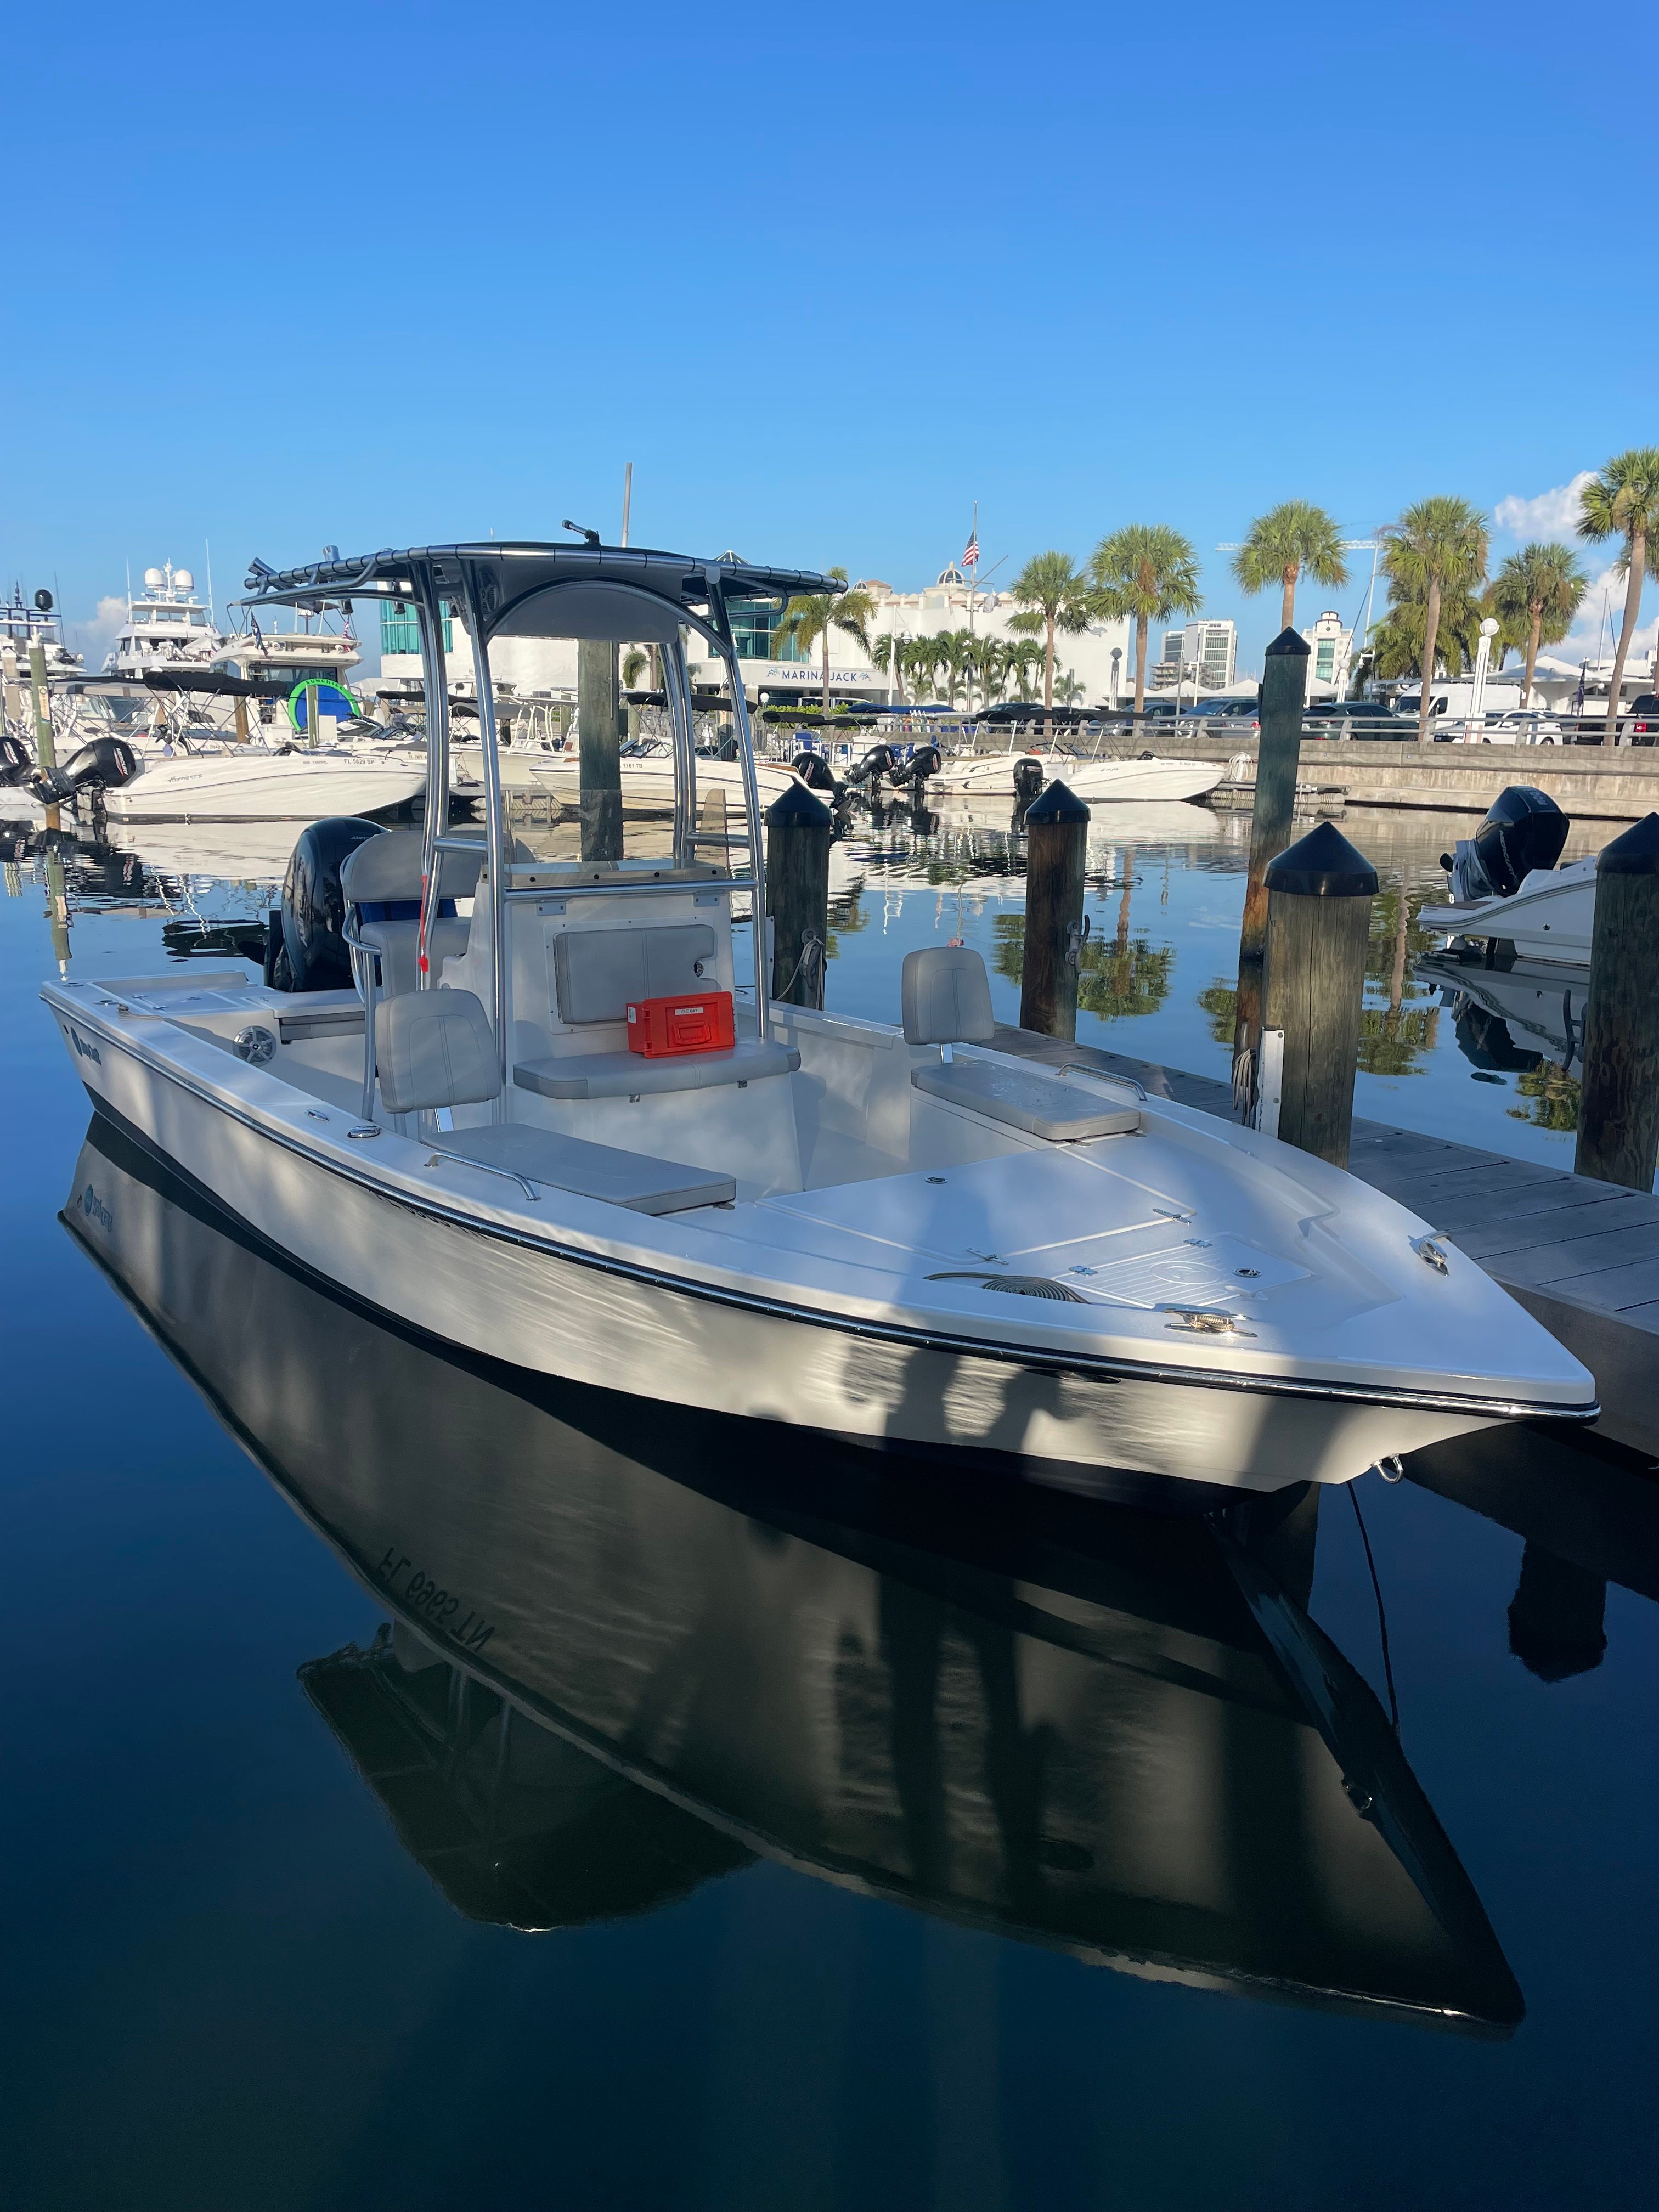 OLD BAY (22FT Maycraft  Center Console - 150 HP- Near Shore Fishing)